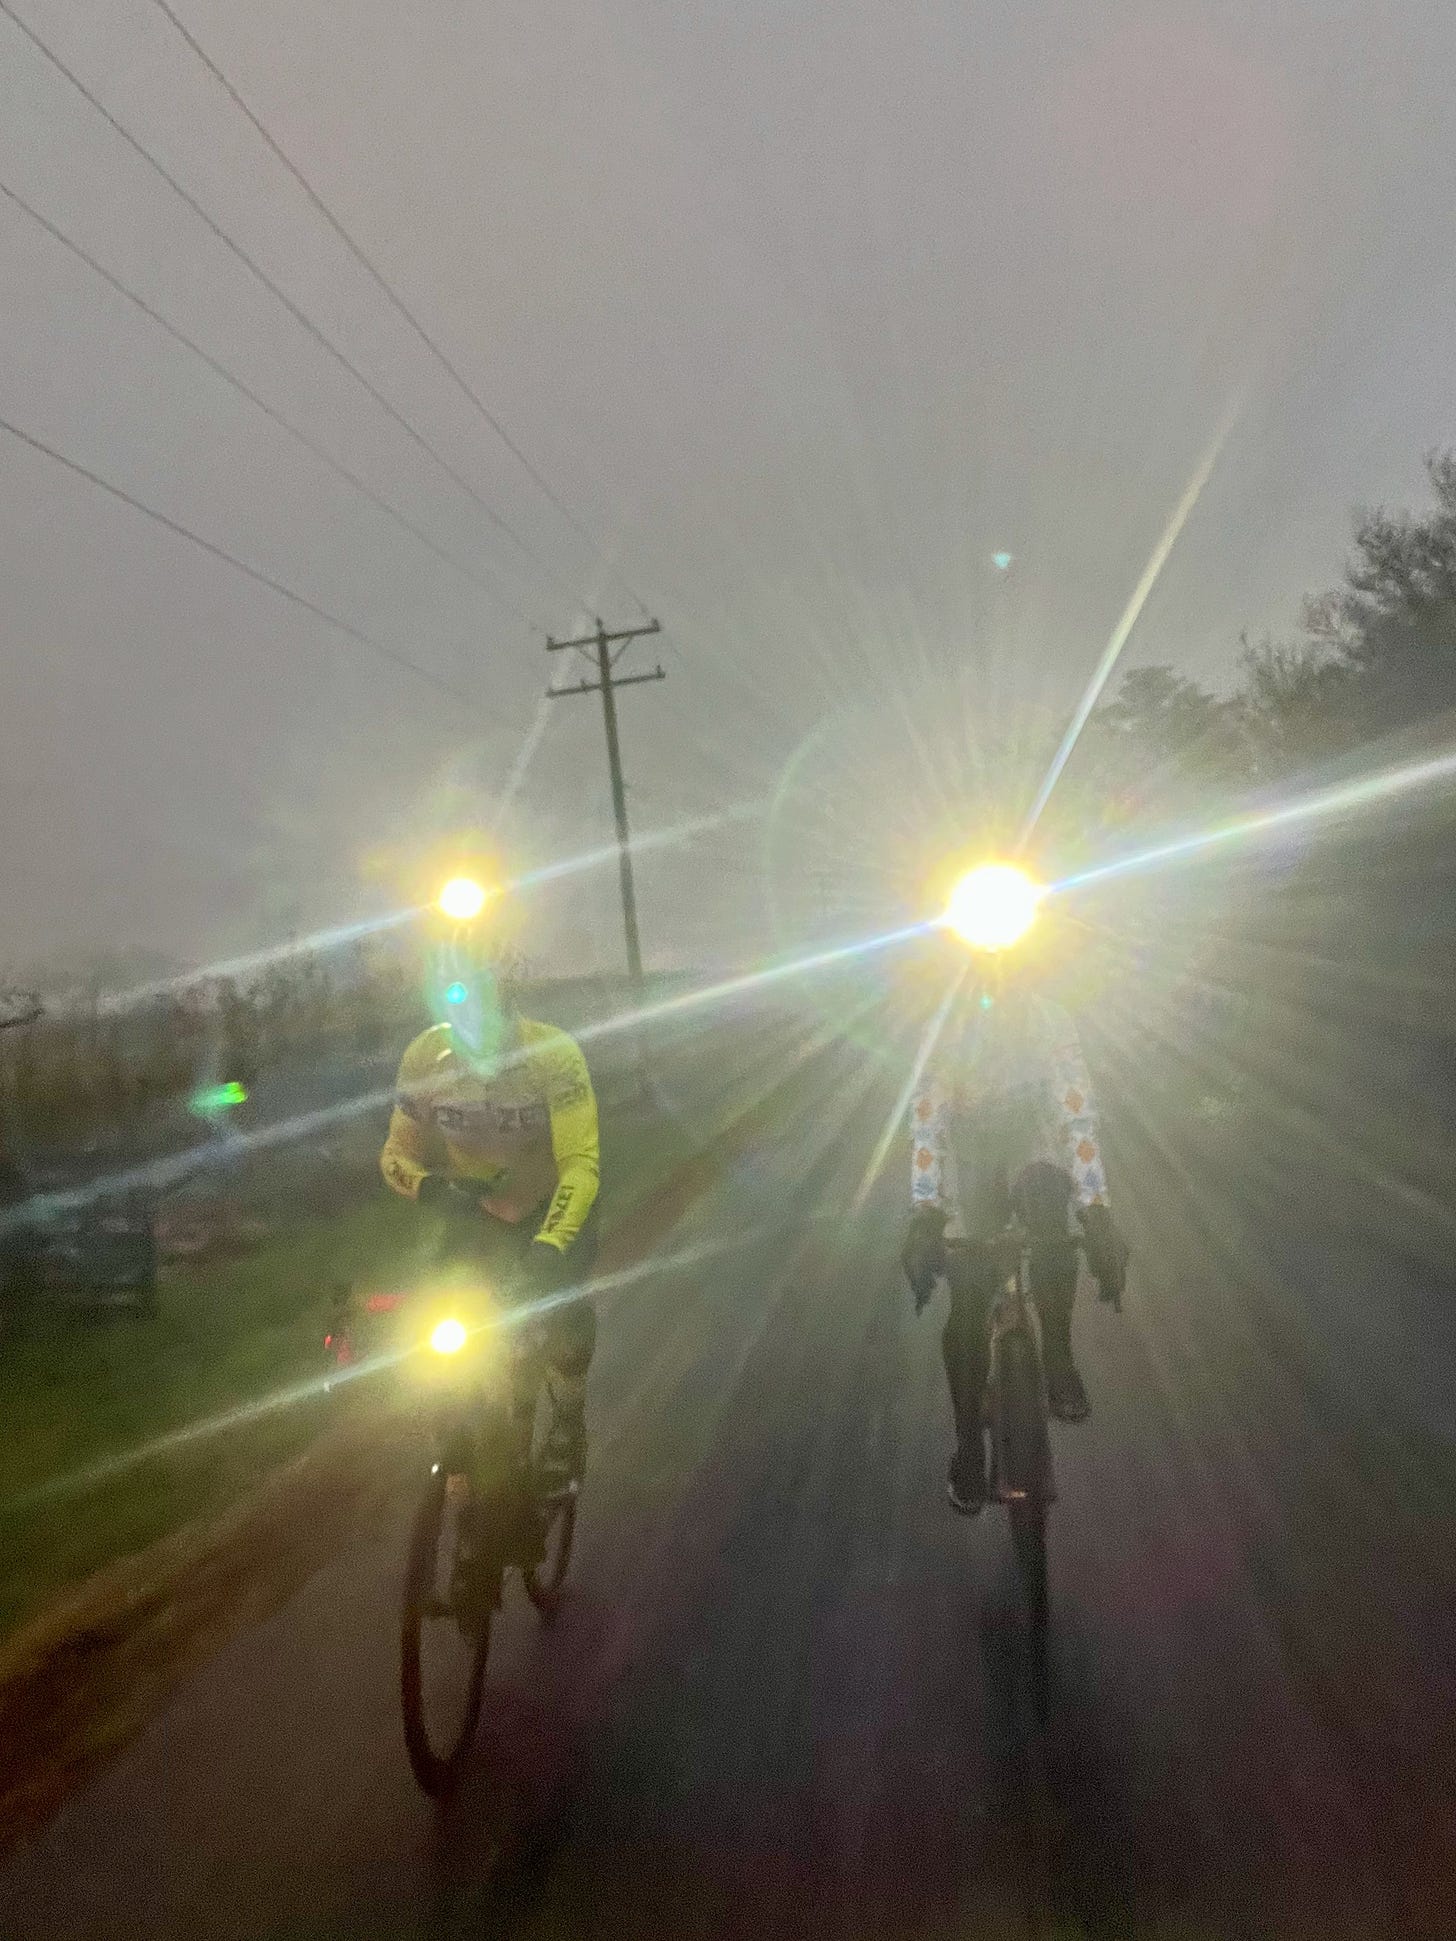 Two people on bicycles in the dark with helmet lights